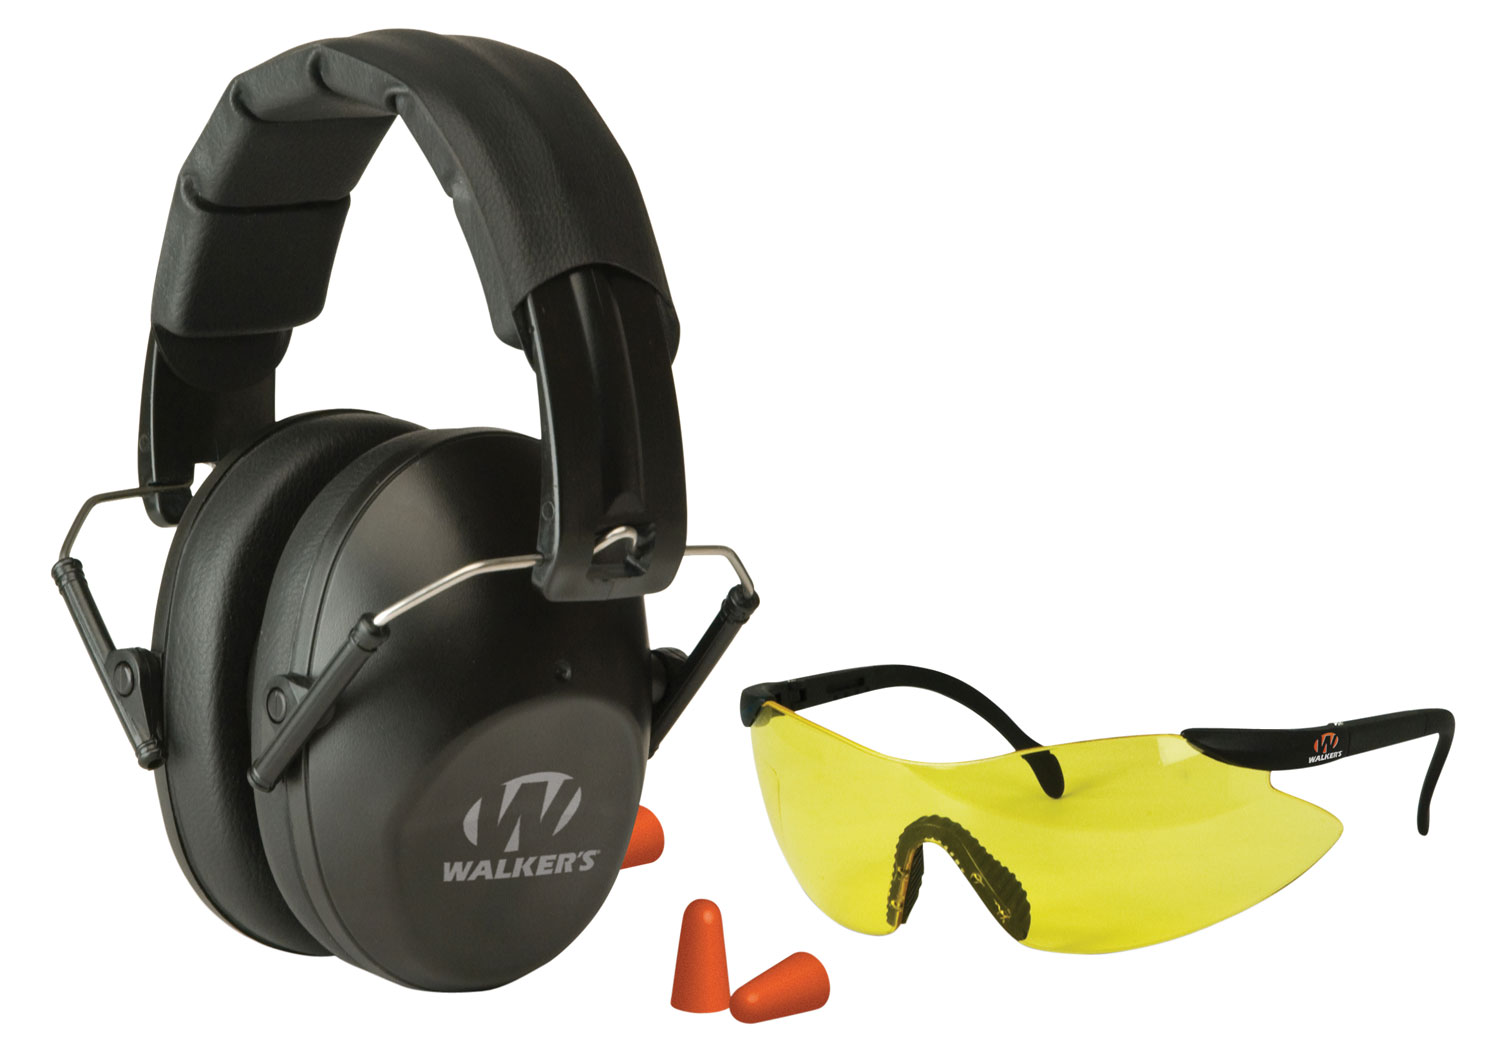 Walkers GWPFPM1GFP Pro Low Profile Muff Combo Kit 31 db Over the Head Black Ear Cups with Black Headband Muffs, Orange 31 dB Foam Earplugs, Yellow Lens with Black Frame Glasses